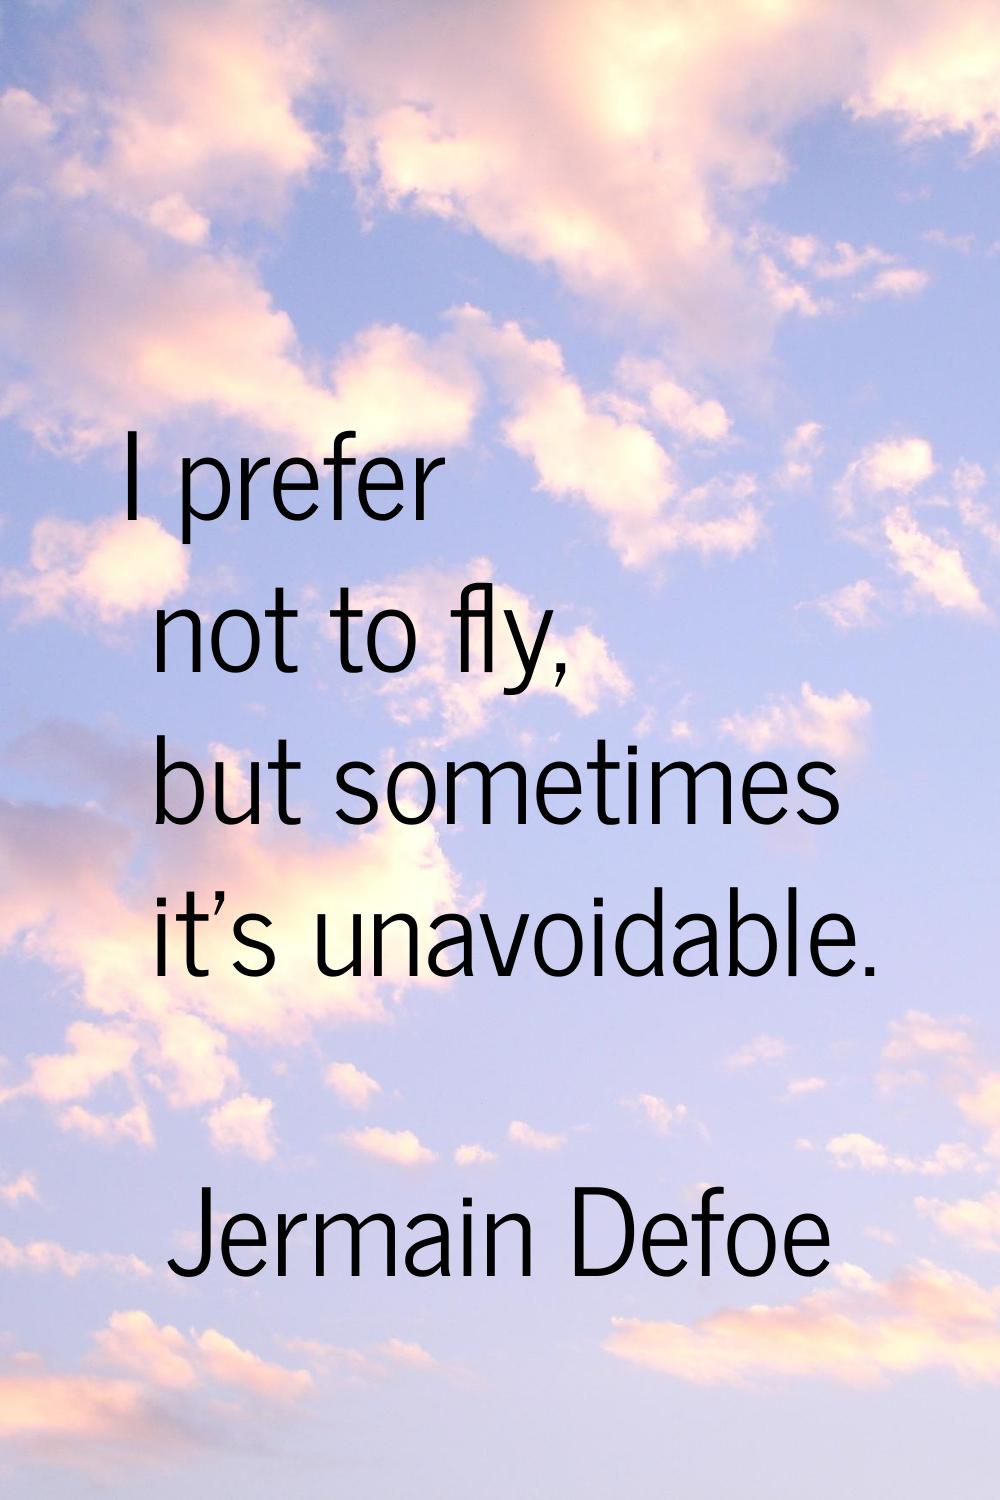 I prefer not to fly, but sometimes it's unavoidable.